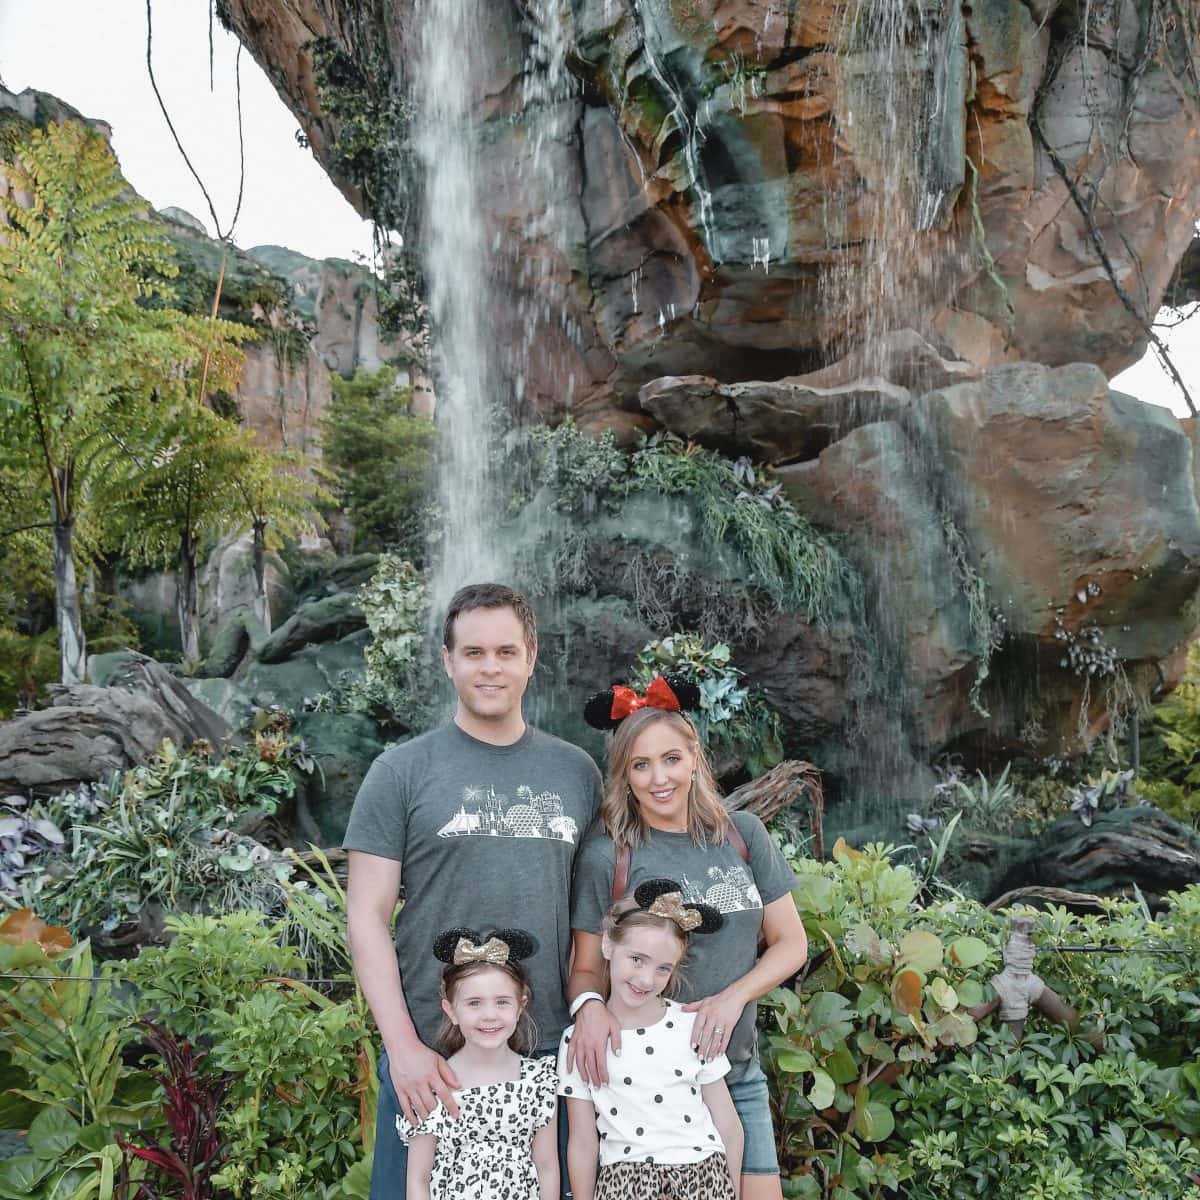 Houston lifestyle blogger Meg O. on the Go shares her favorite Disney World for kids experiences for preschoolers and up - Pandora in Animal Kingdom